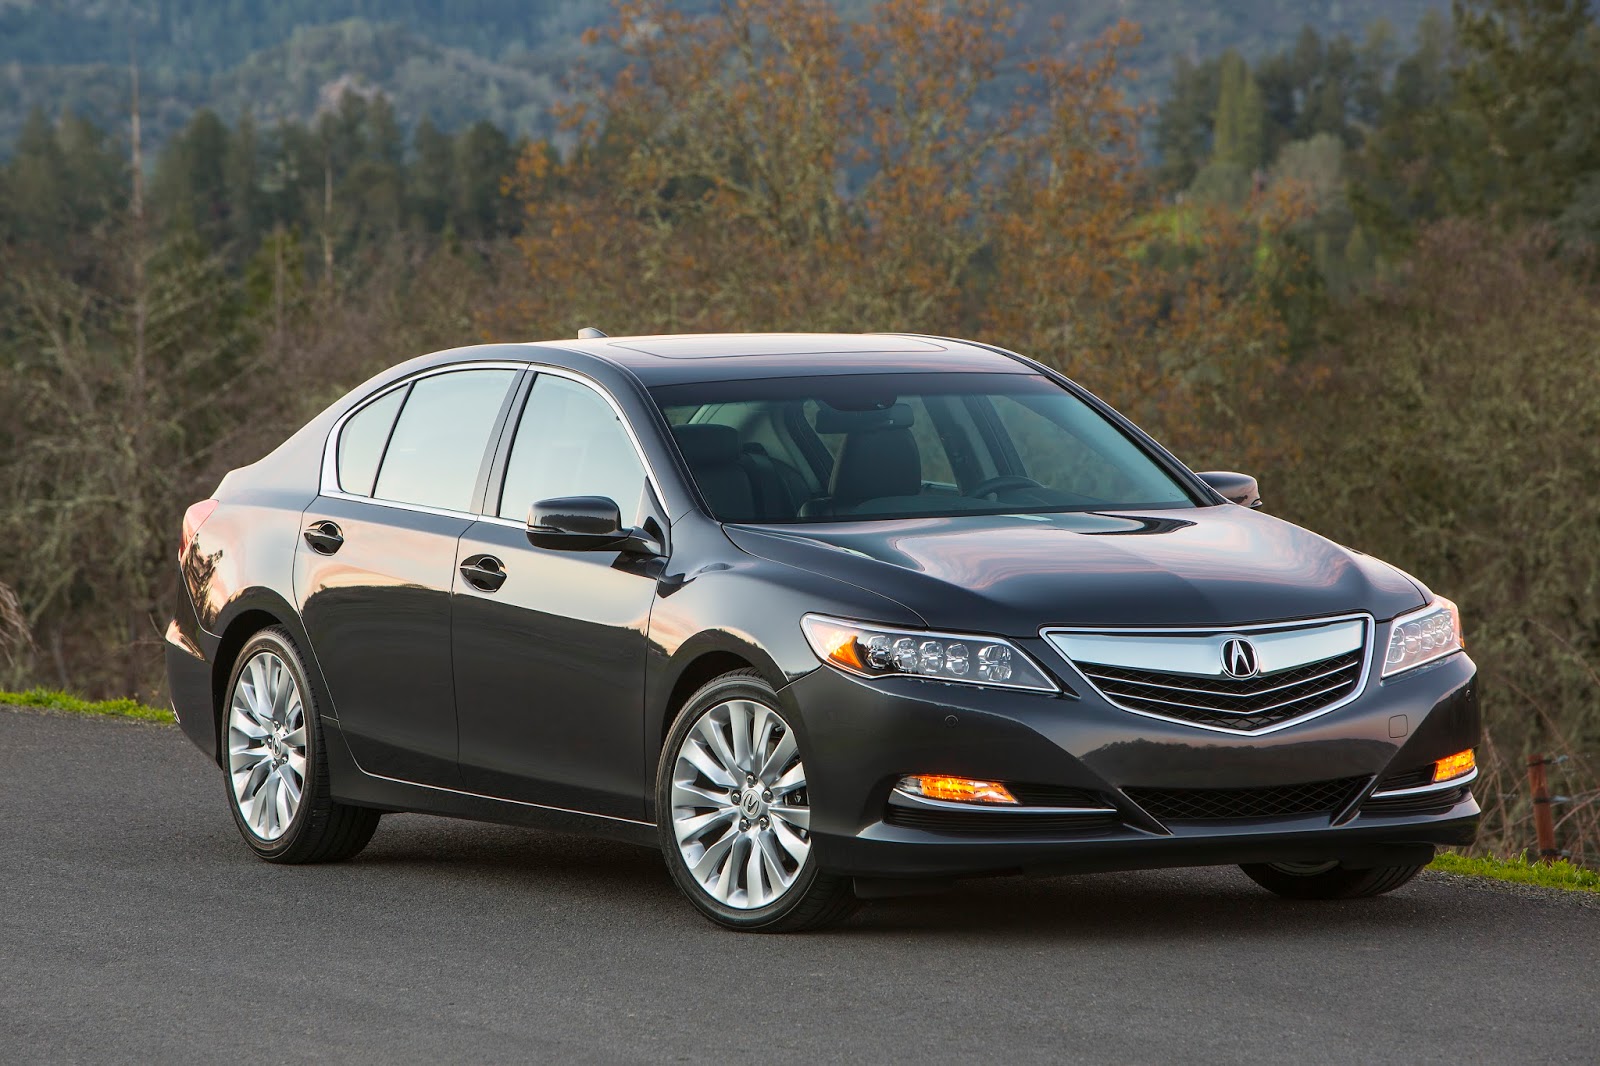 New Car Review: 2014 Acura RLX